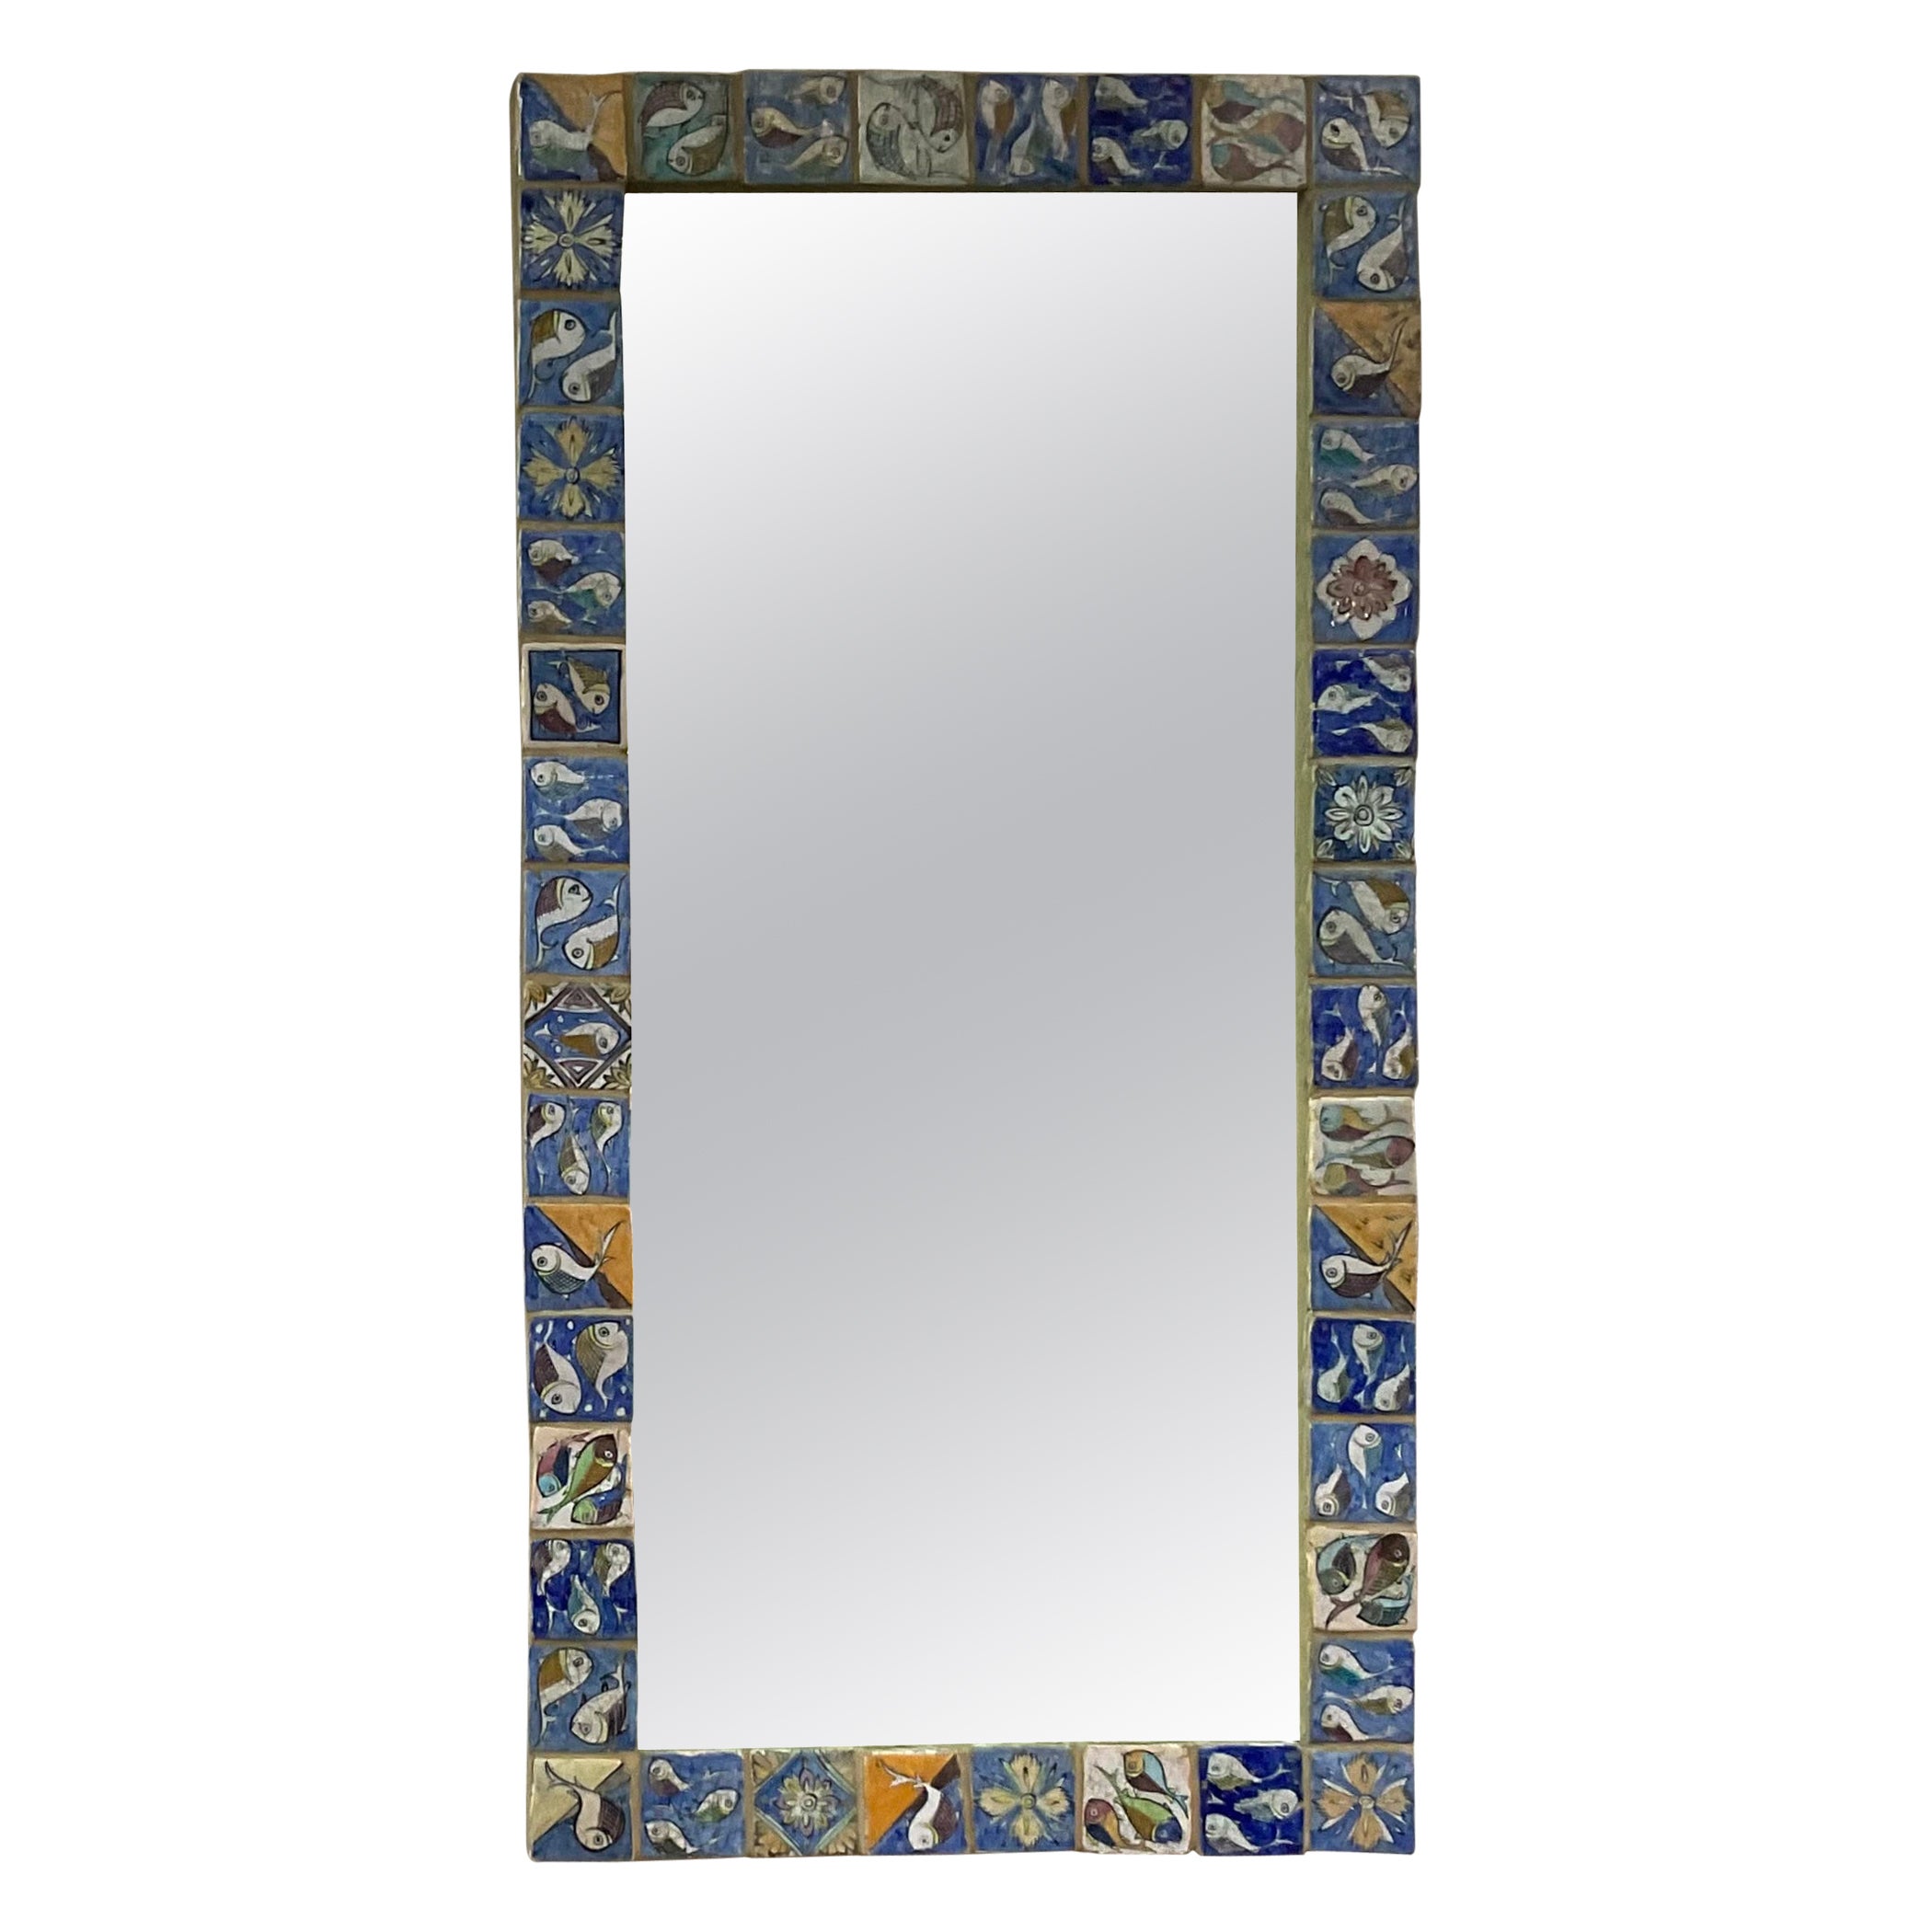 One of a Kind Large Hand Painted Ceramic Tile Mirror by Joseph Malekan